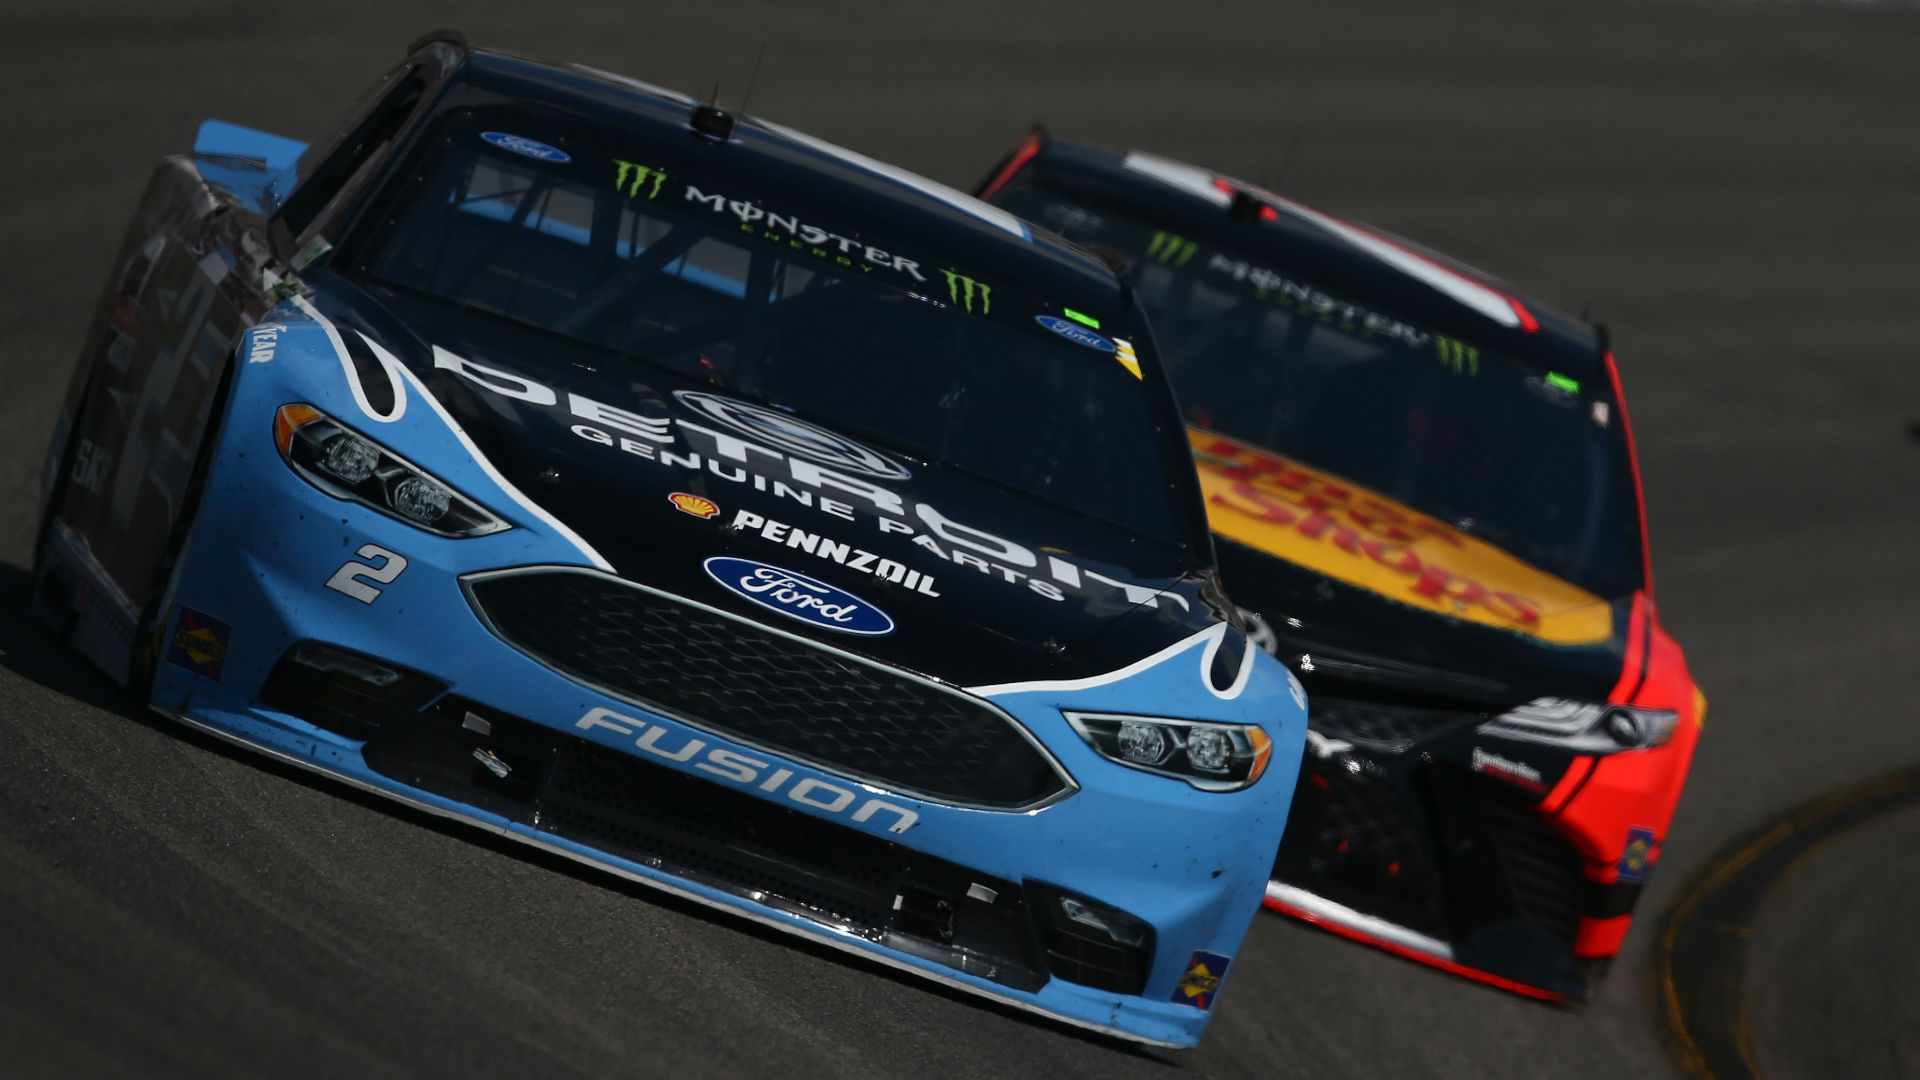 NASCAR at Chicago: Vegas odds, fantasy advice, prediction, sleepers, drivers to watch